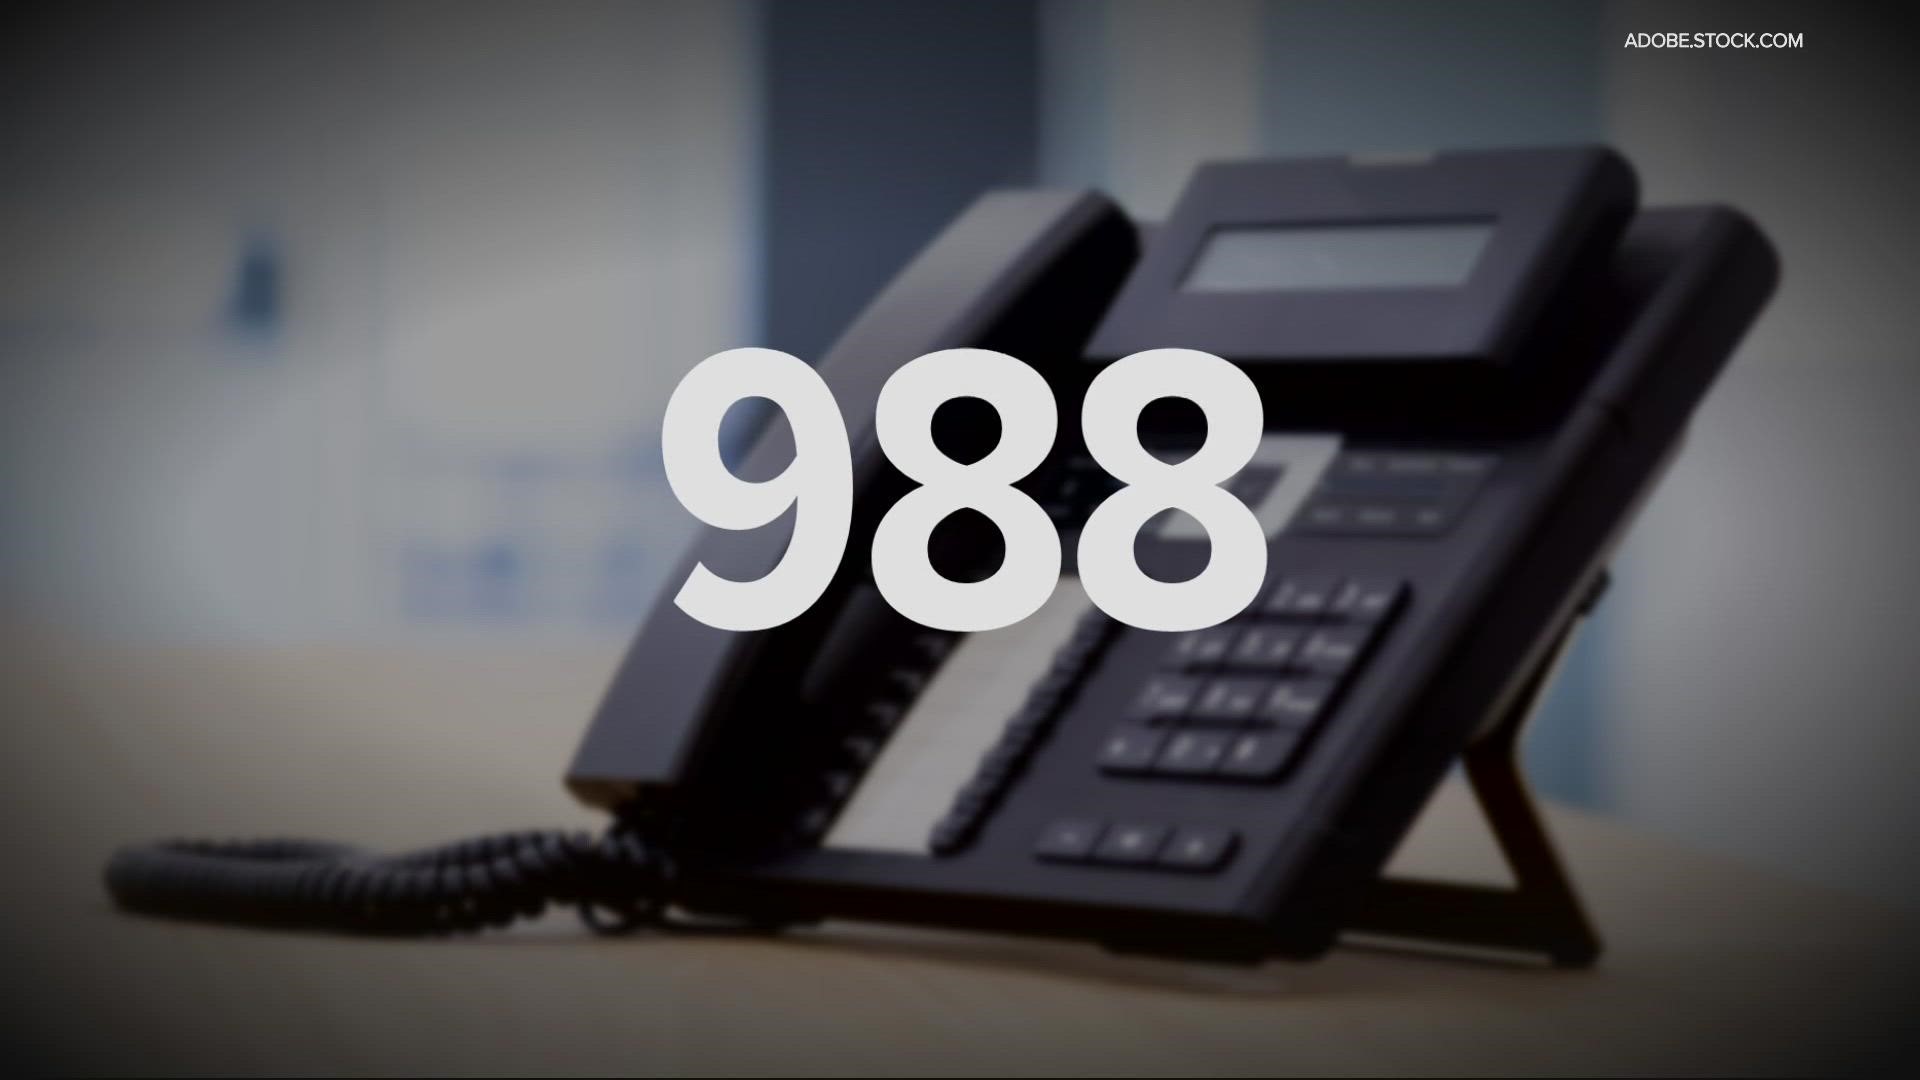 The new three-digit hotline launches Saturday, and Oregon agencies are preparing for an anticipated increase in call volume.